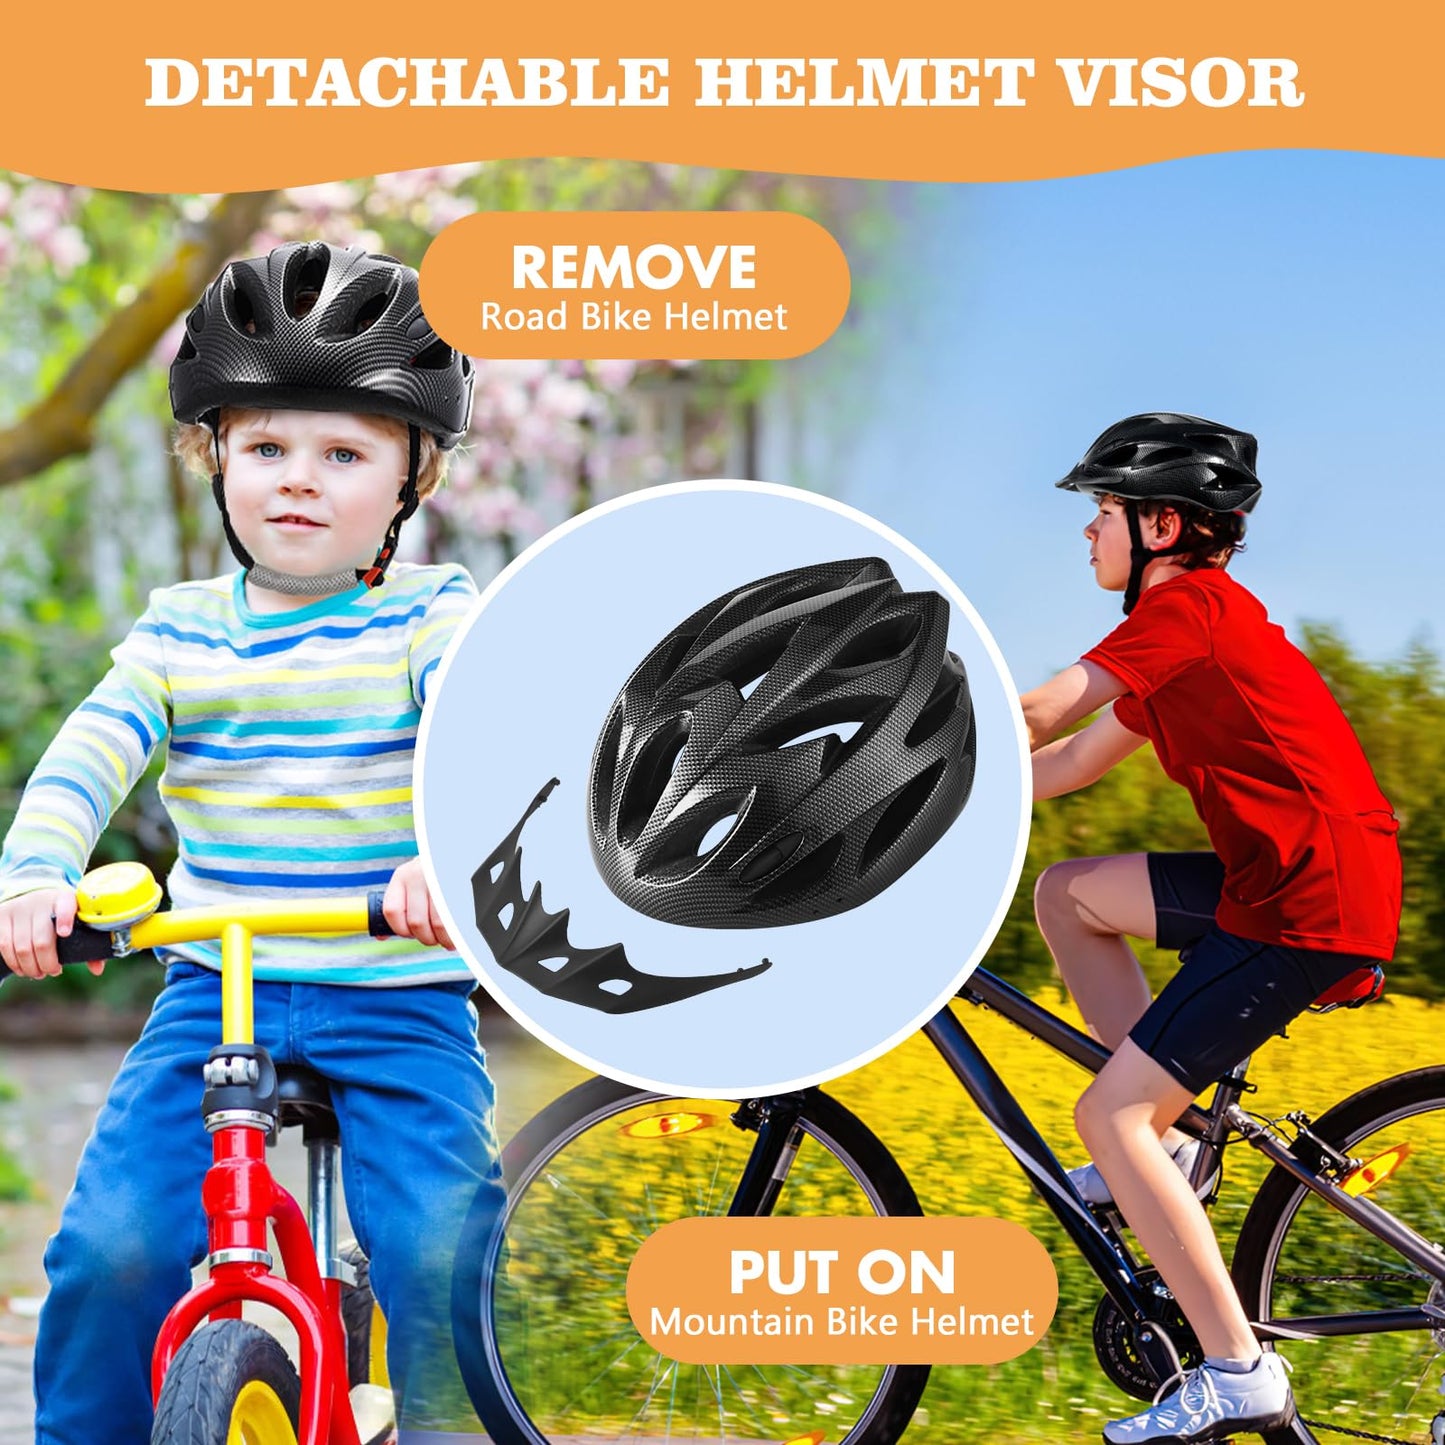 Zacro Kids Bike Helmet - Boys and Girls Youth Bike Helmets Fits Ages 5-8/8-14 Year Olds, Dial Fit Adjustment & Detachable Visor, Lightweight Bicycle Helmet for Mountain Cycling CPSC Safety Certified